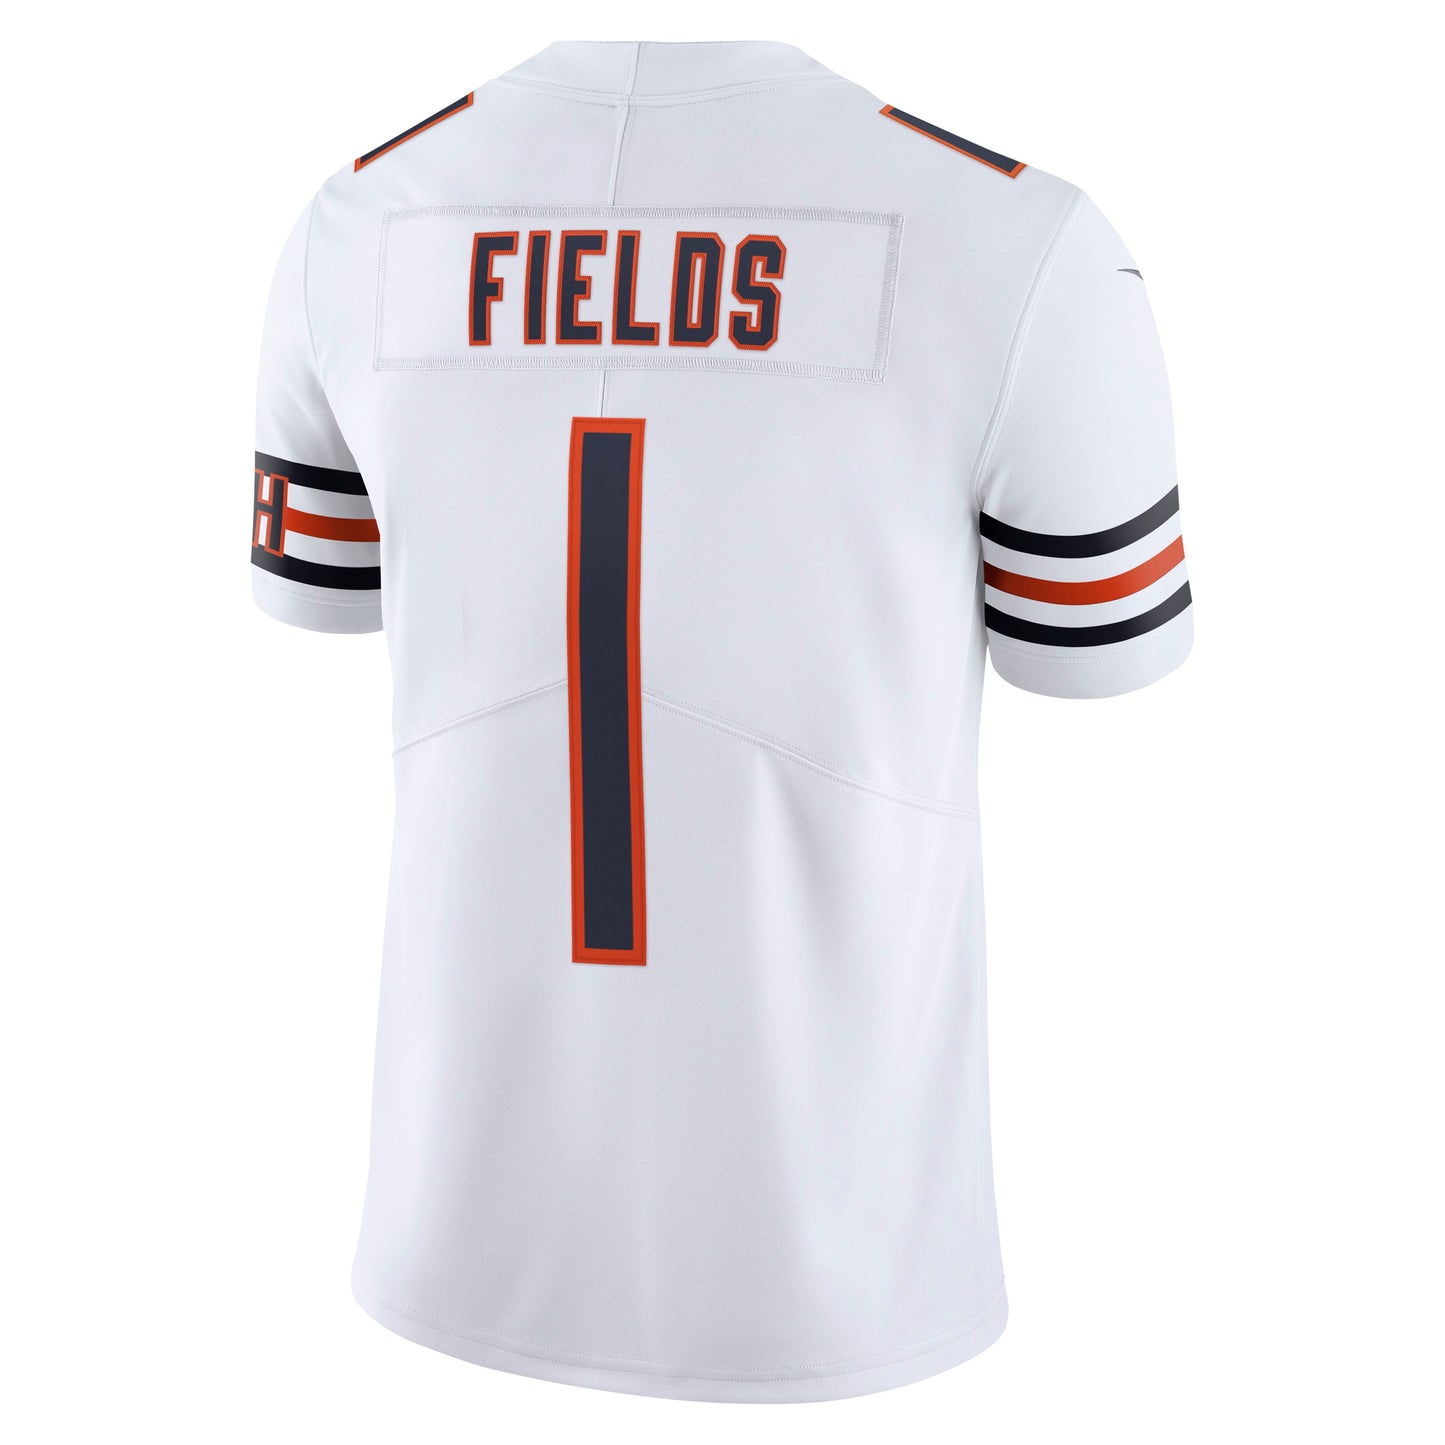 Justin Fields Chicago Bears Nike Men's White Limited Game Jersey